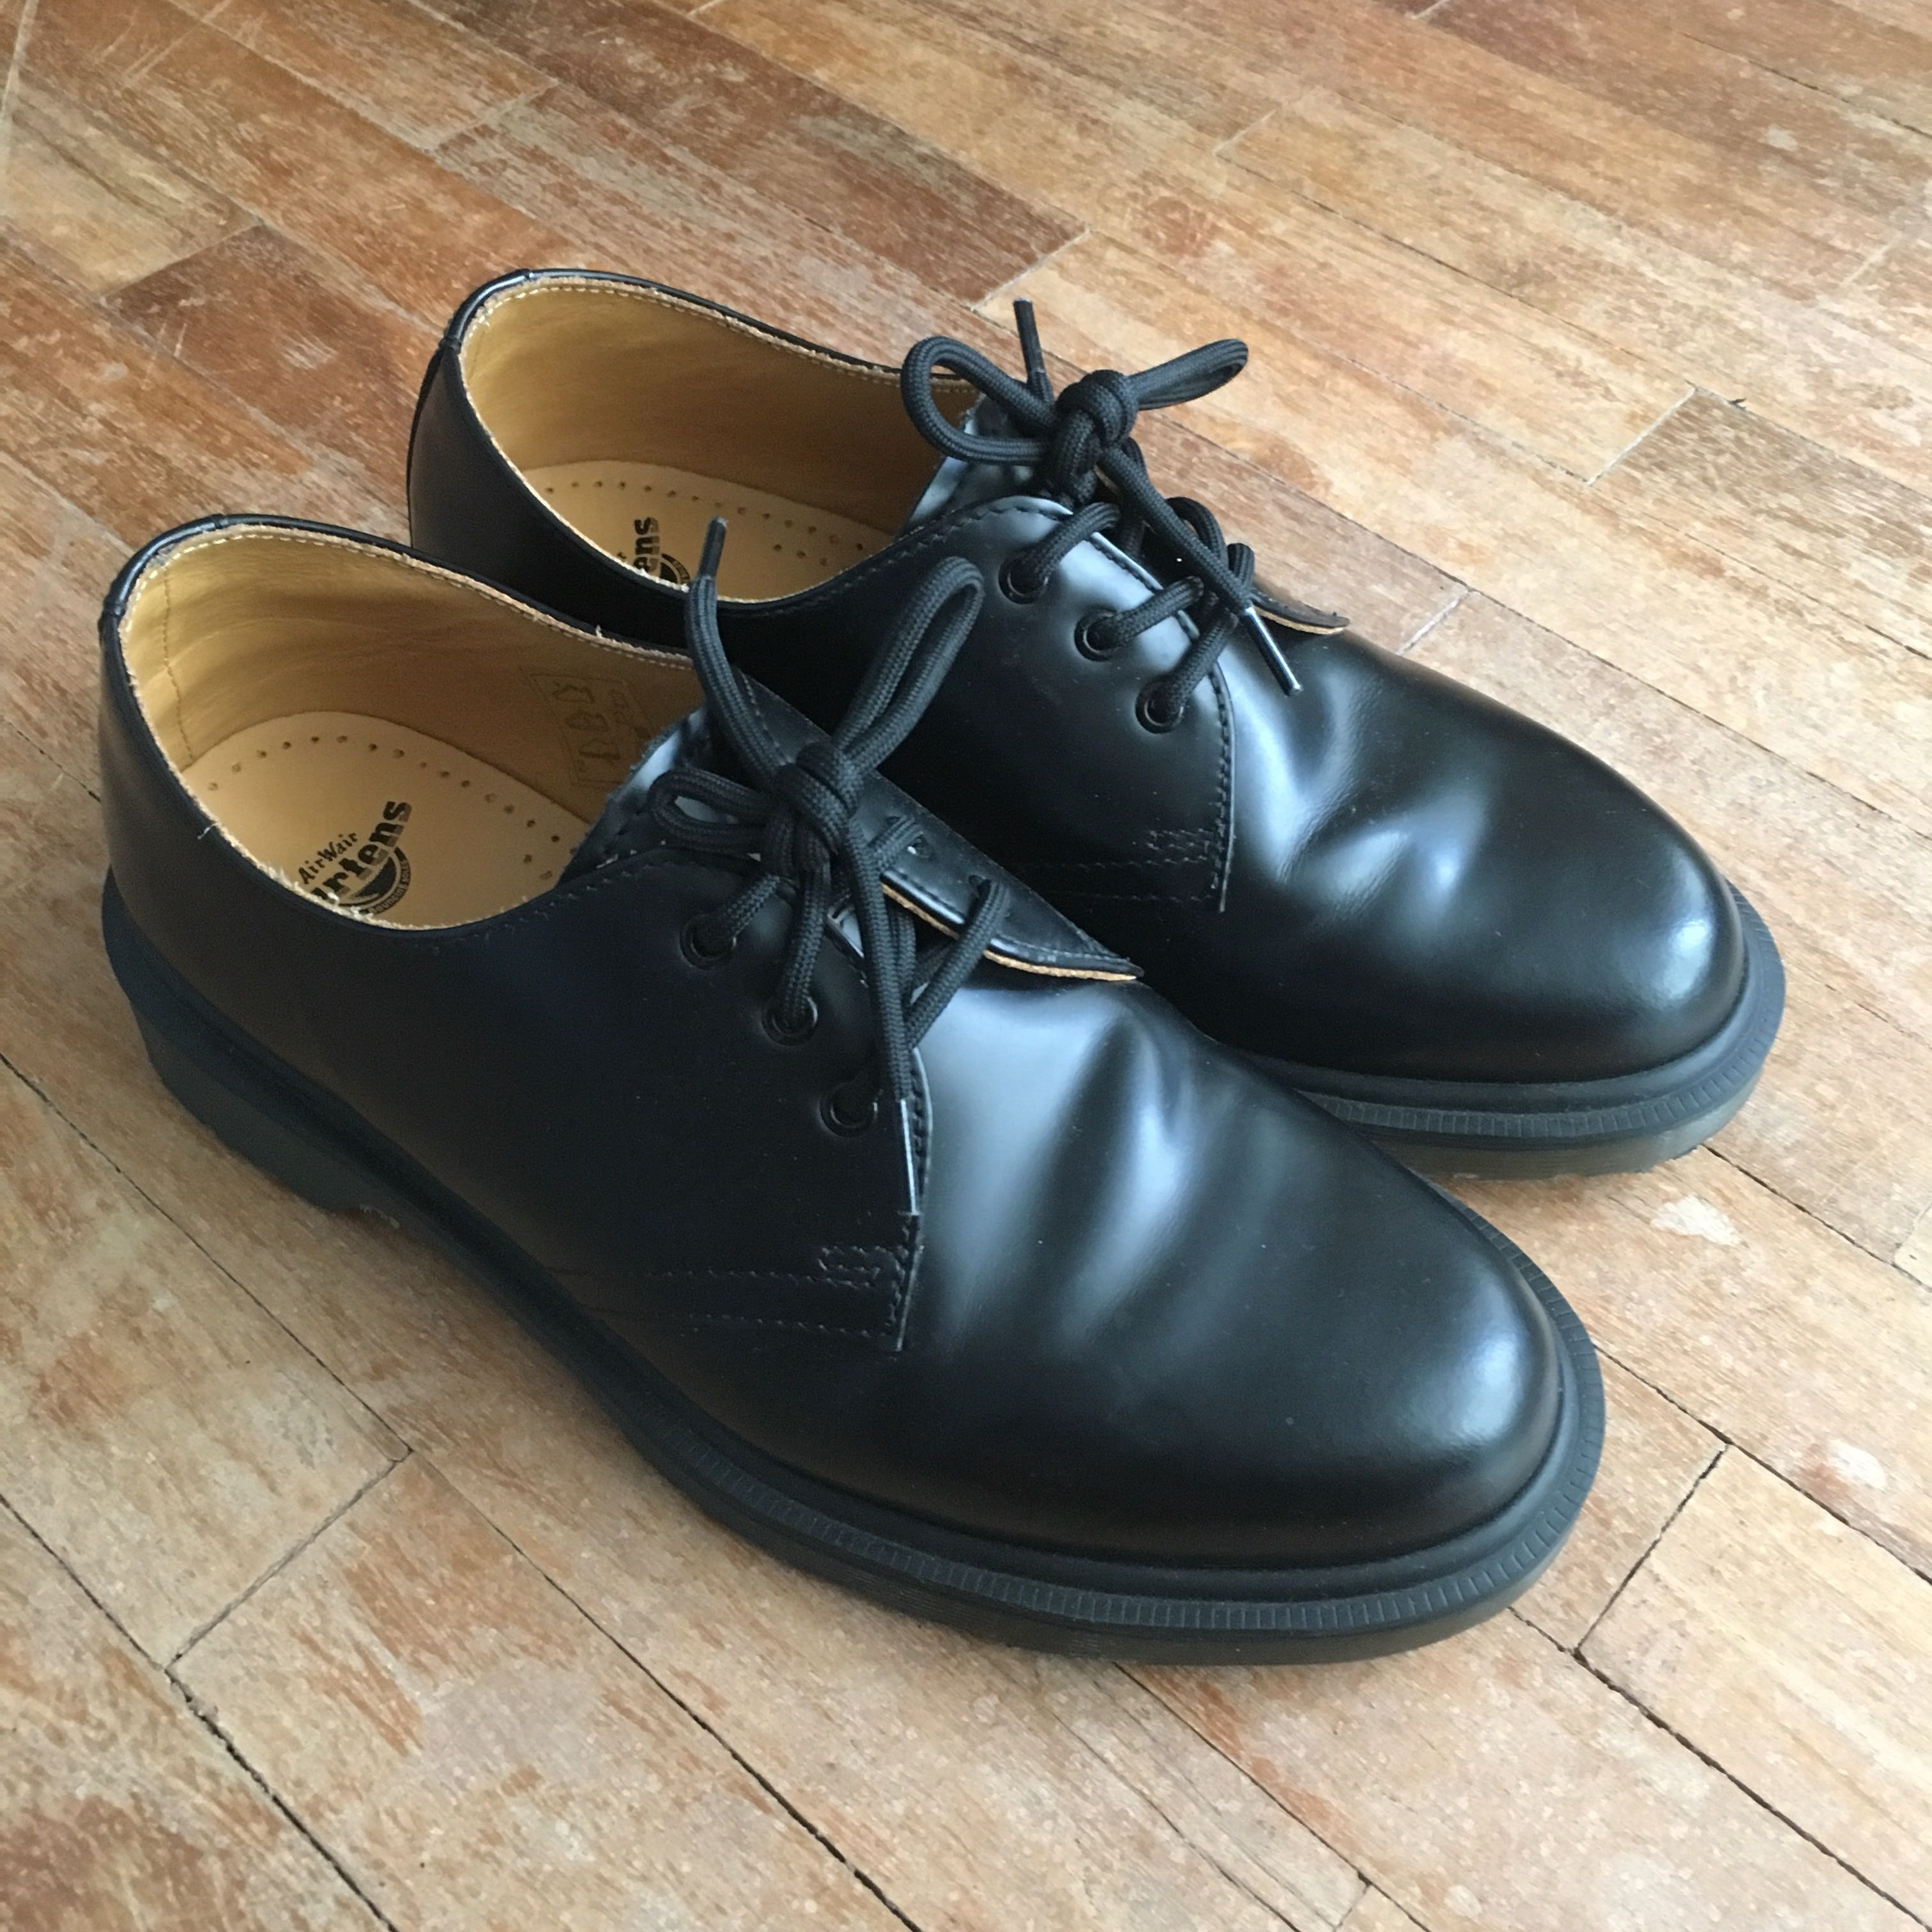 Dr. Martens 1461 Smooth Black PW (FREE SHIPPING), Women's Fashion ...